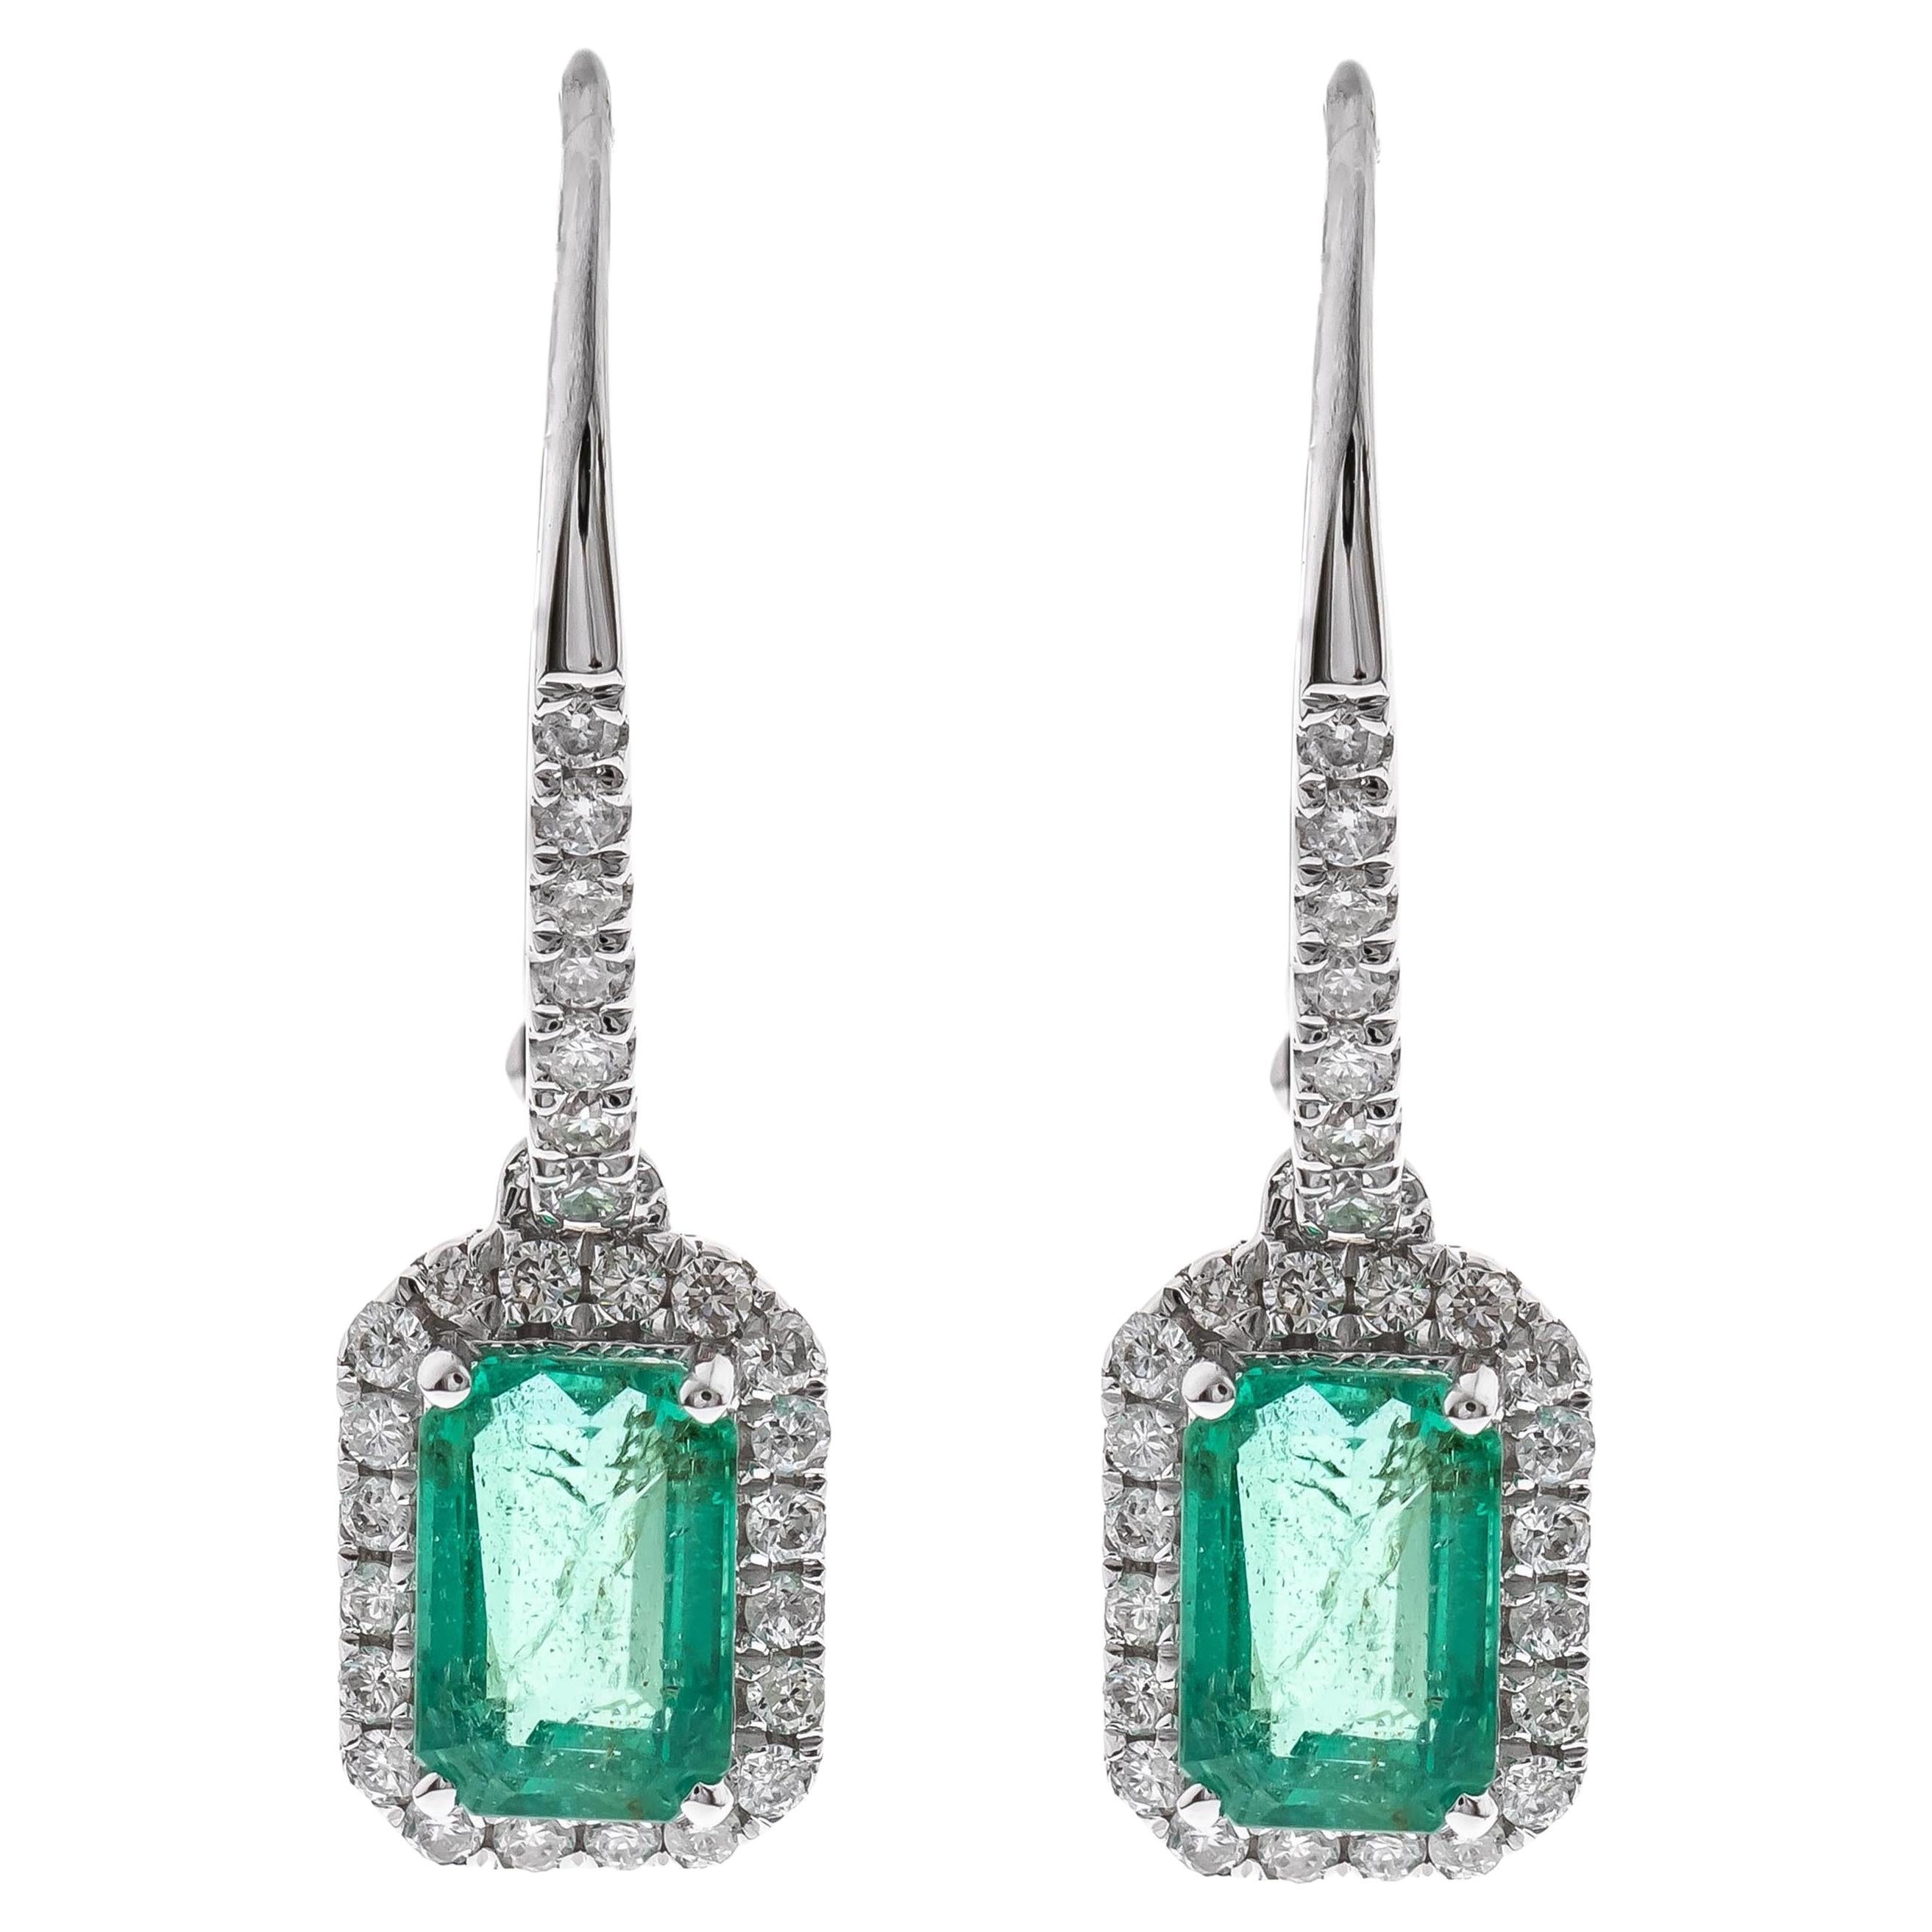 1.22 carat Emerald-cut Emerald With Diamond accents 14K White Gold Earring.